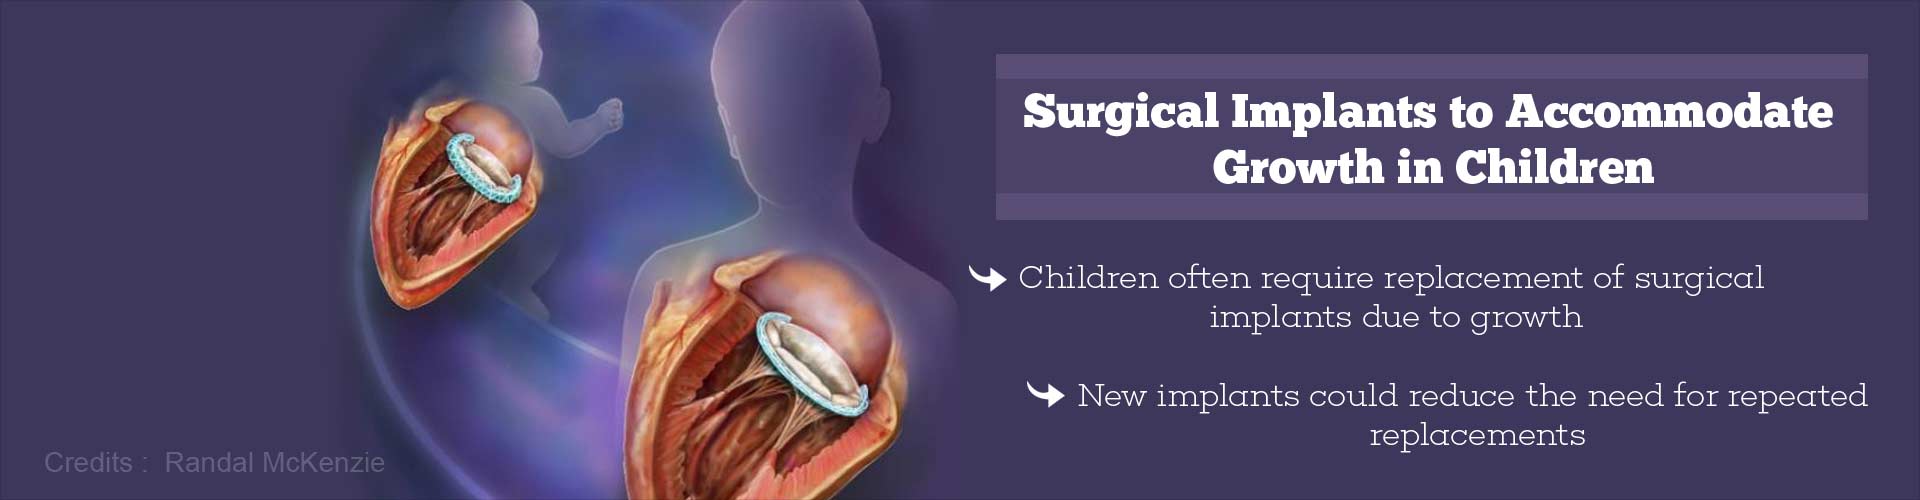 Surgical implants to accommodate growth in children
- Children often require replacement of surgical implants due to growth
- New implants could reduce the need for repeated replacements